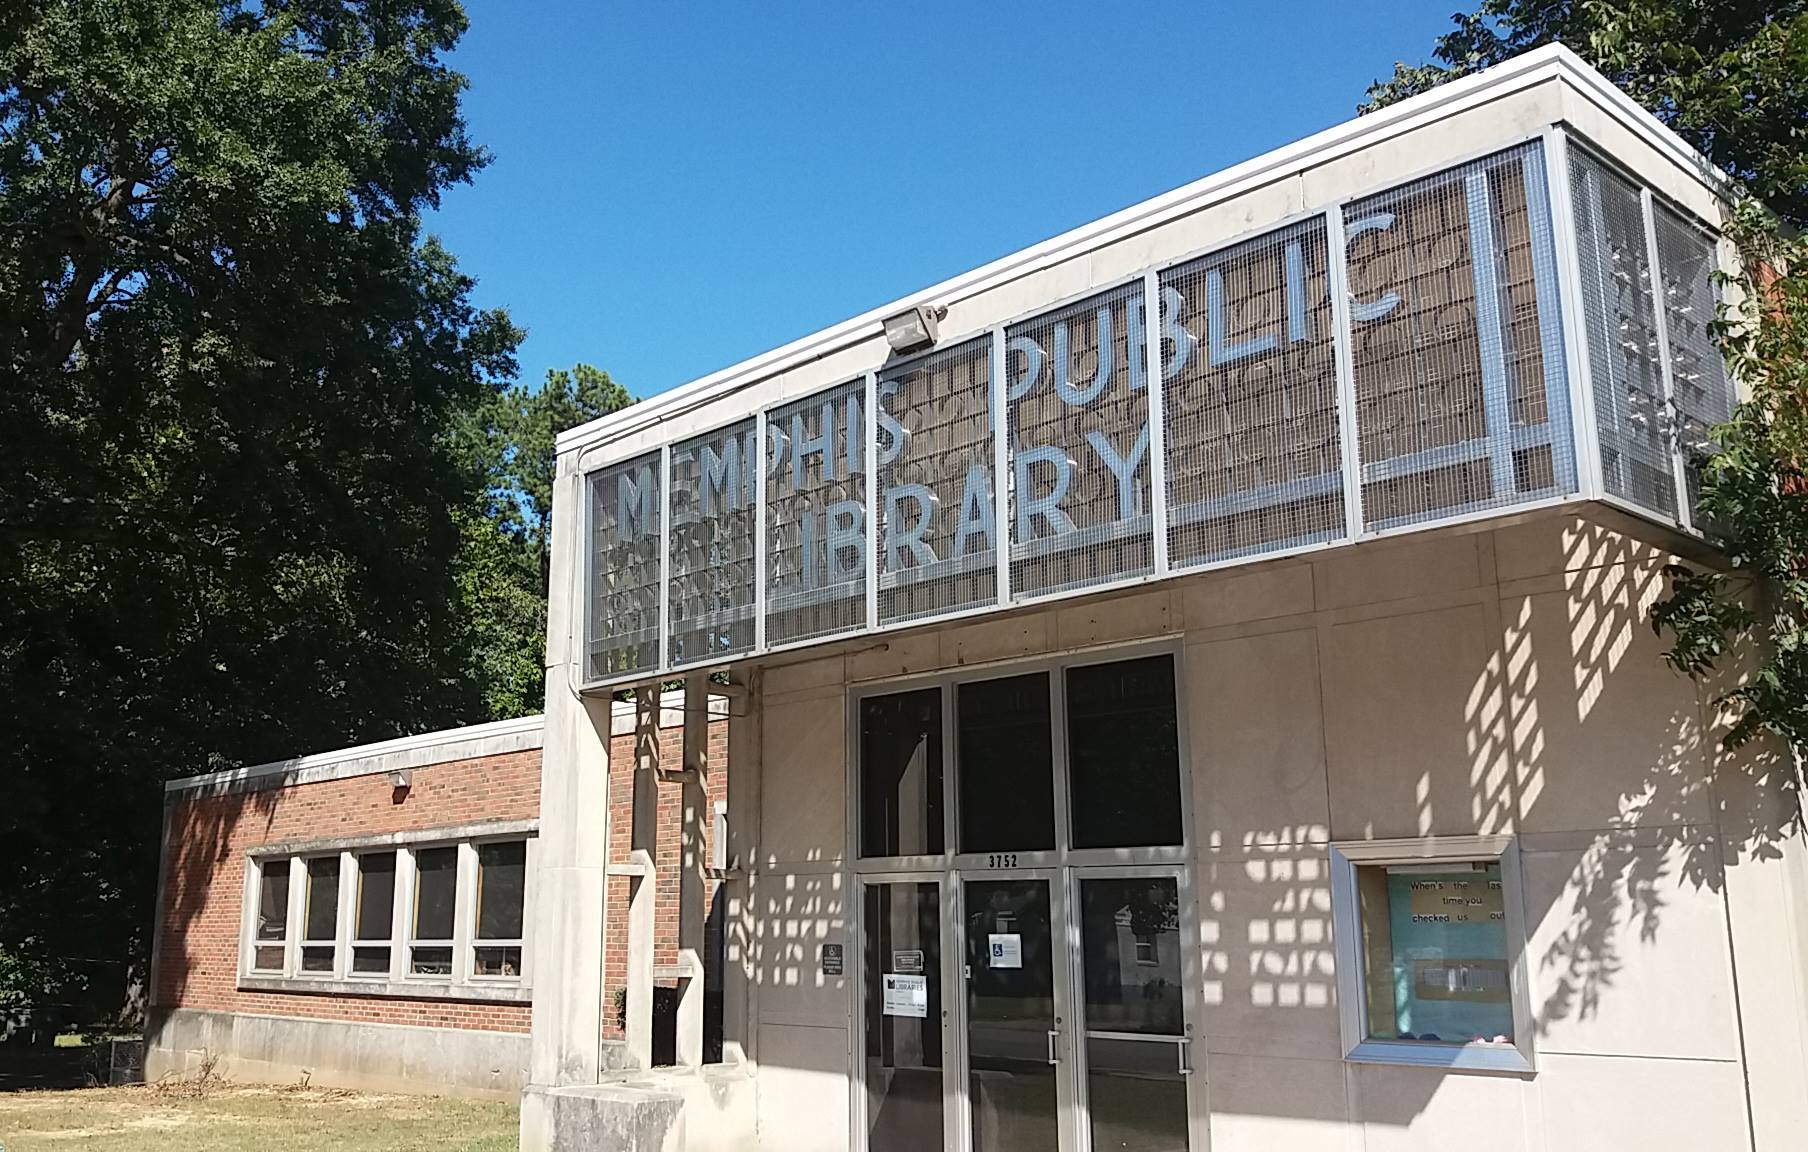 Memphis Library Foundation's first update to Randolph Library was to remove the sign's metal frame and add lighting and a blue background and lighting. (MLF)